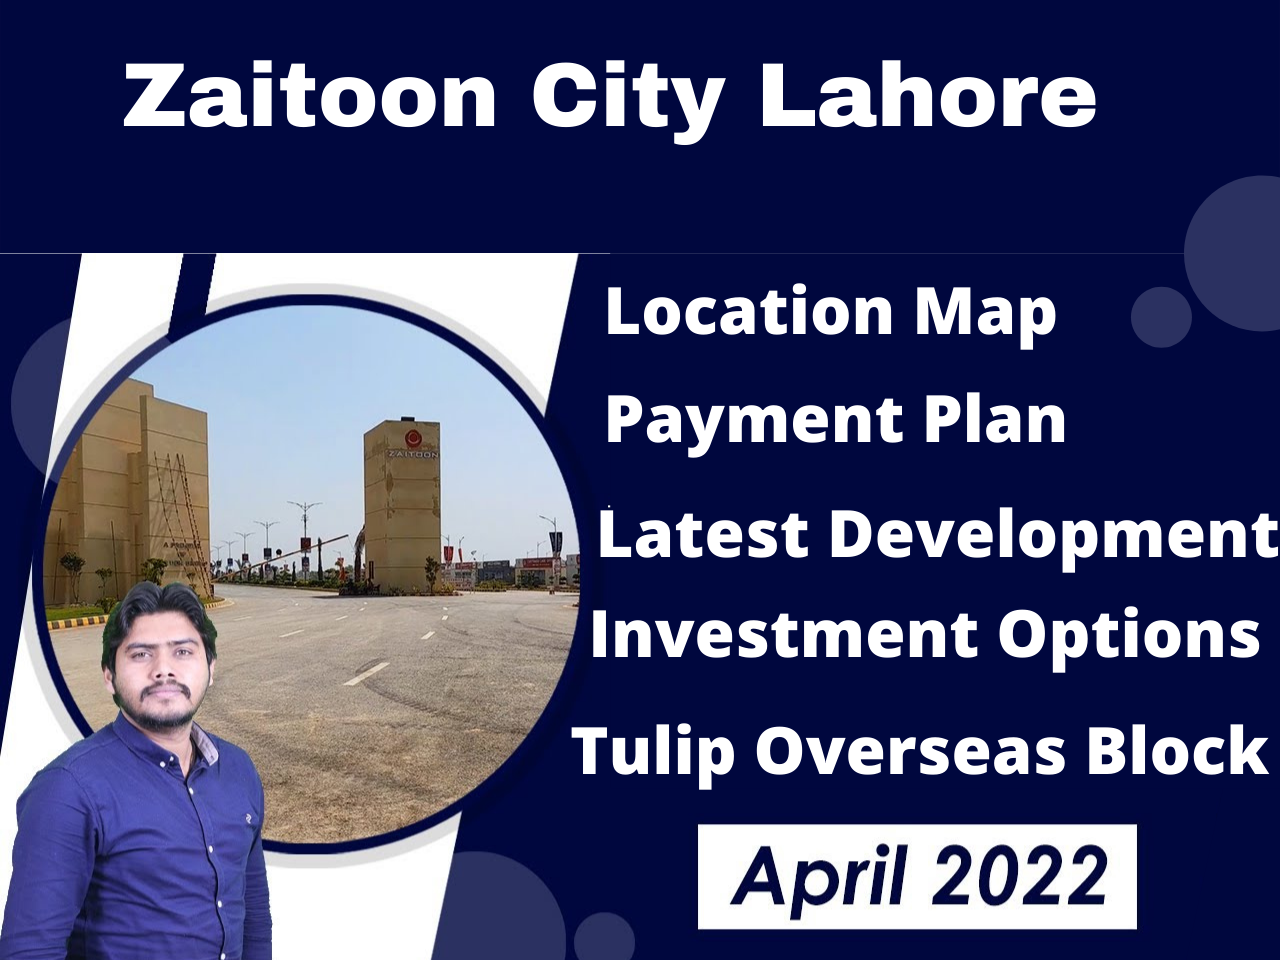 Zaitoon City Lahore payment , location and investment options